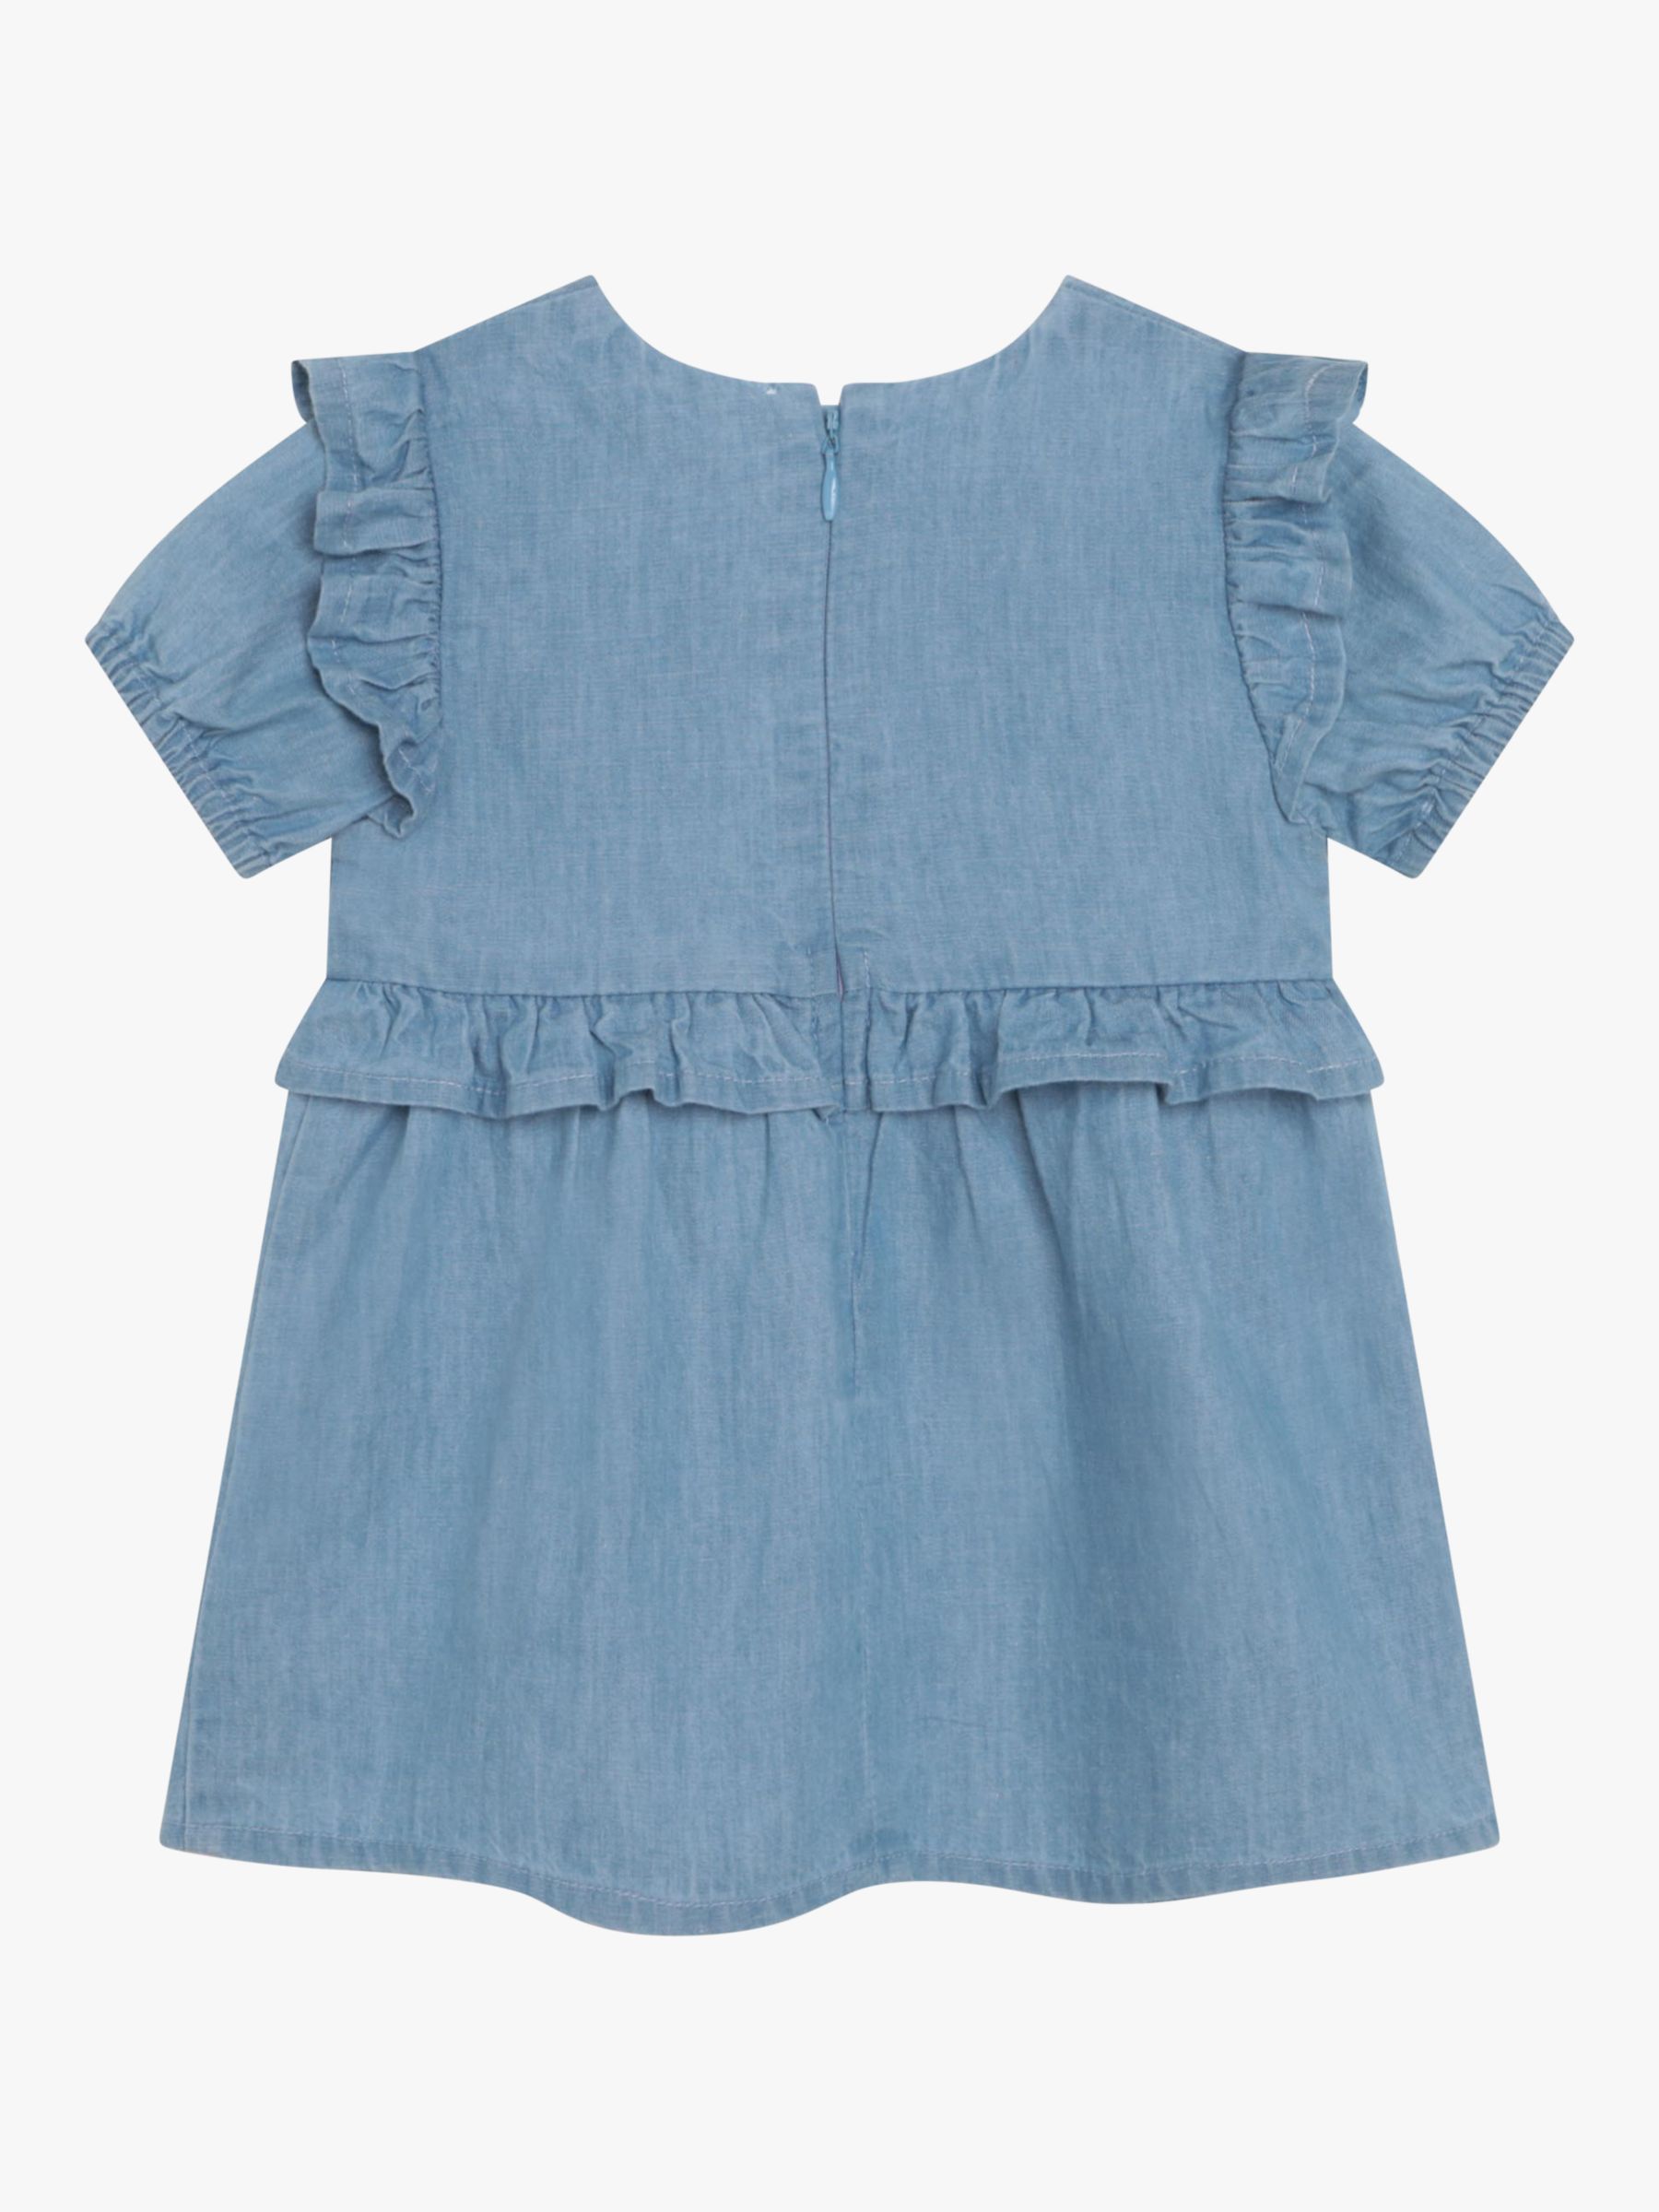 Carrément Beau Baby Floral Embroidered Light Denim Dress, Blue, 6 years